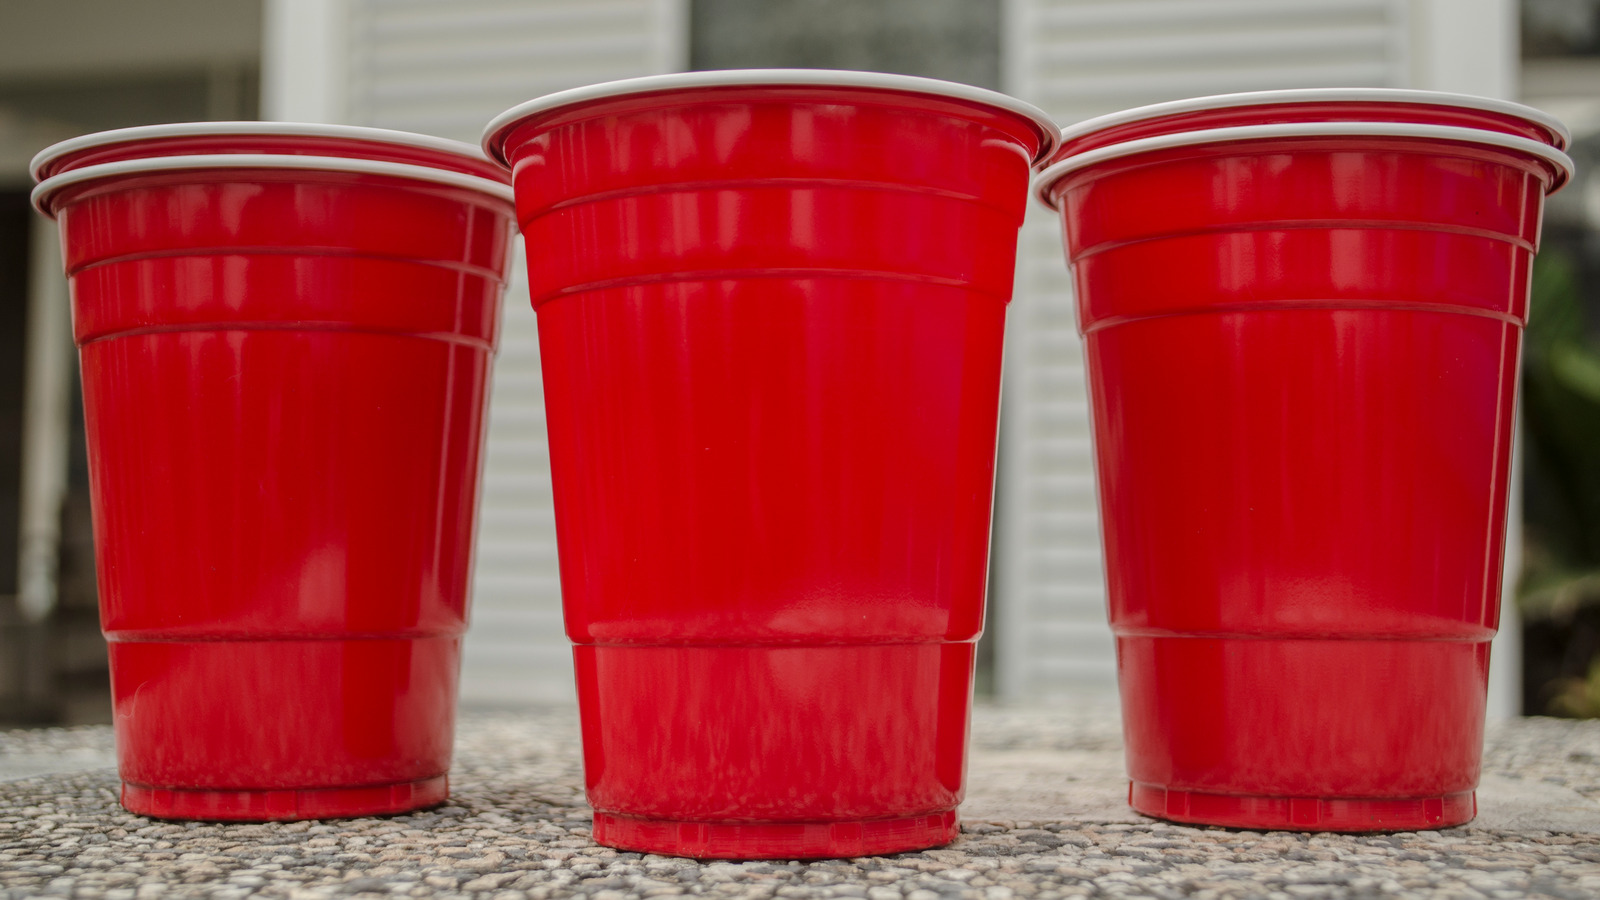 https://www.mashed.com/img/gallery/the-lines-on-solo-cups-mean-more-than-you-think/l-intro-1638341466.jpg